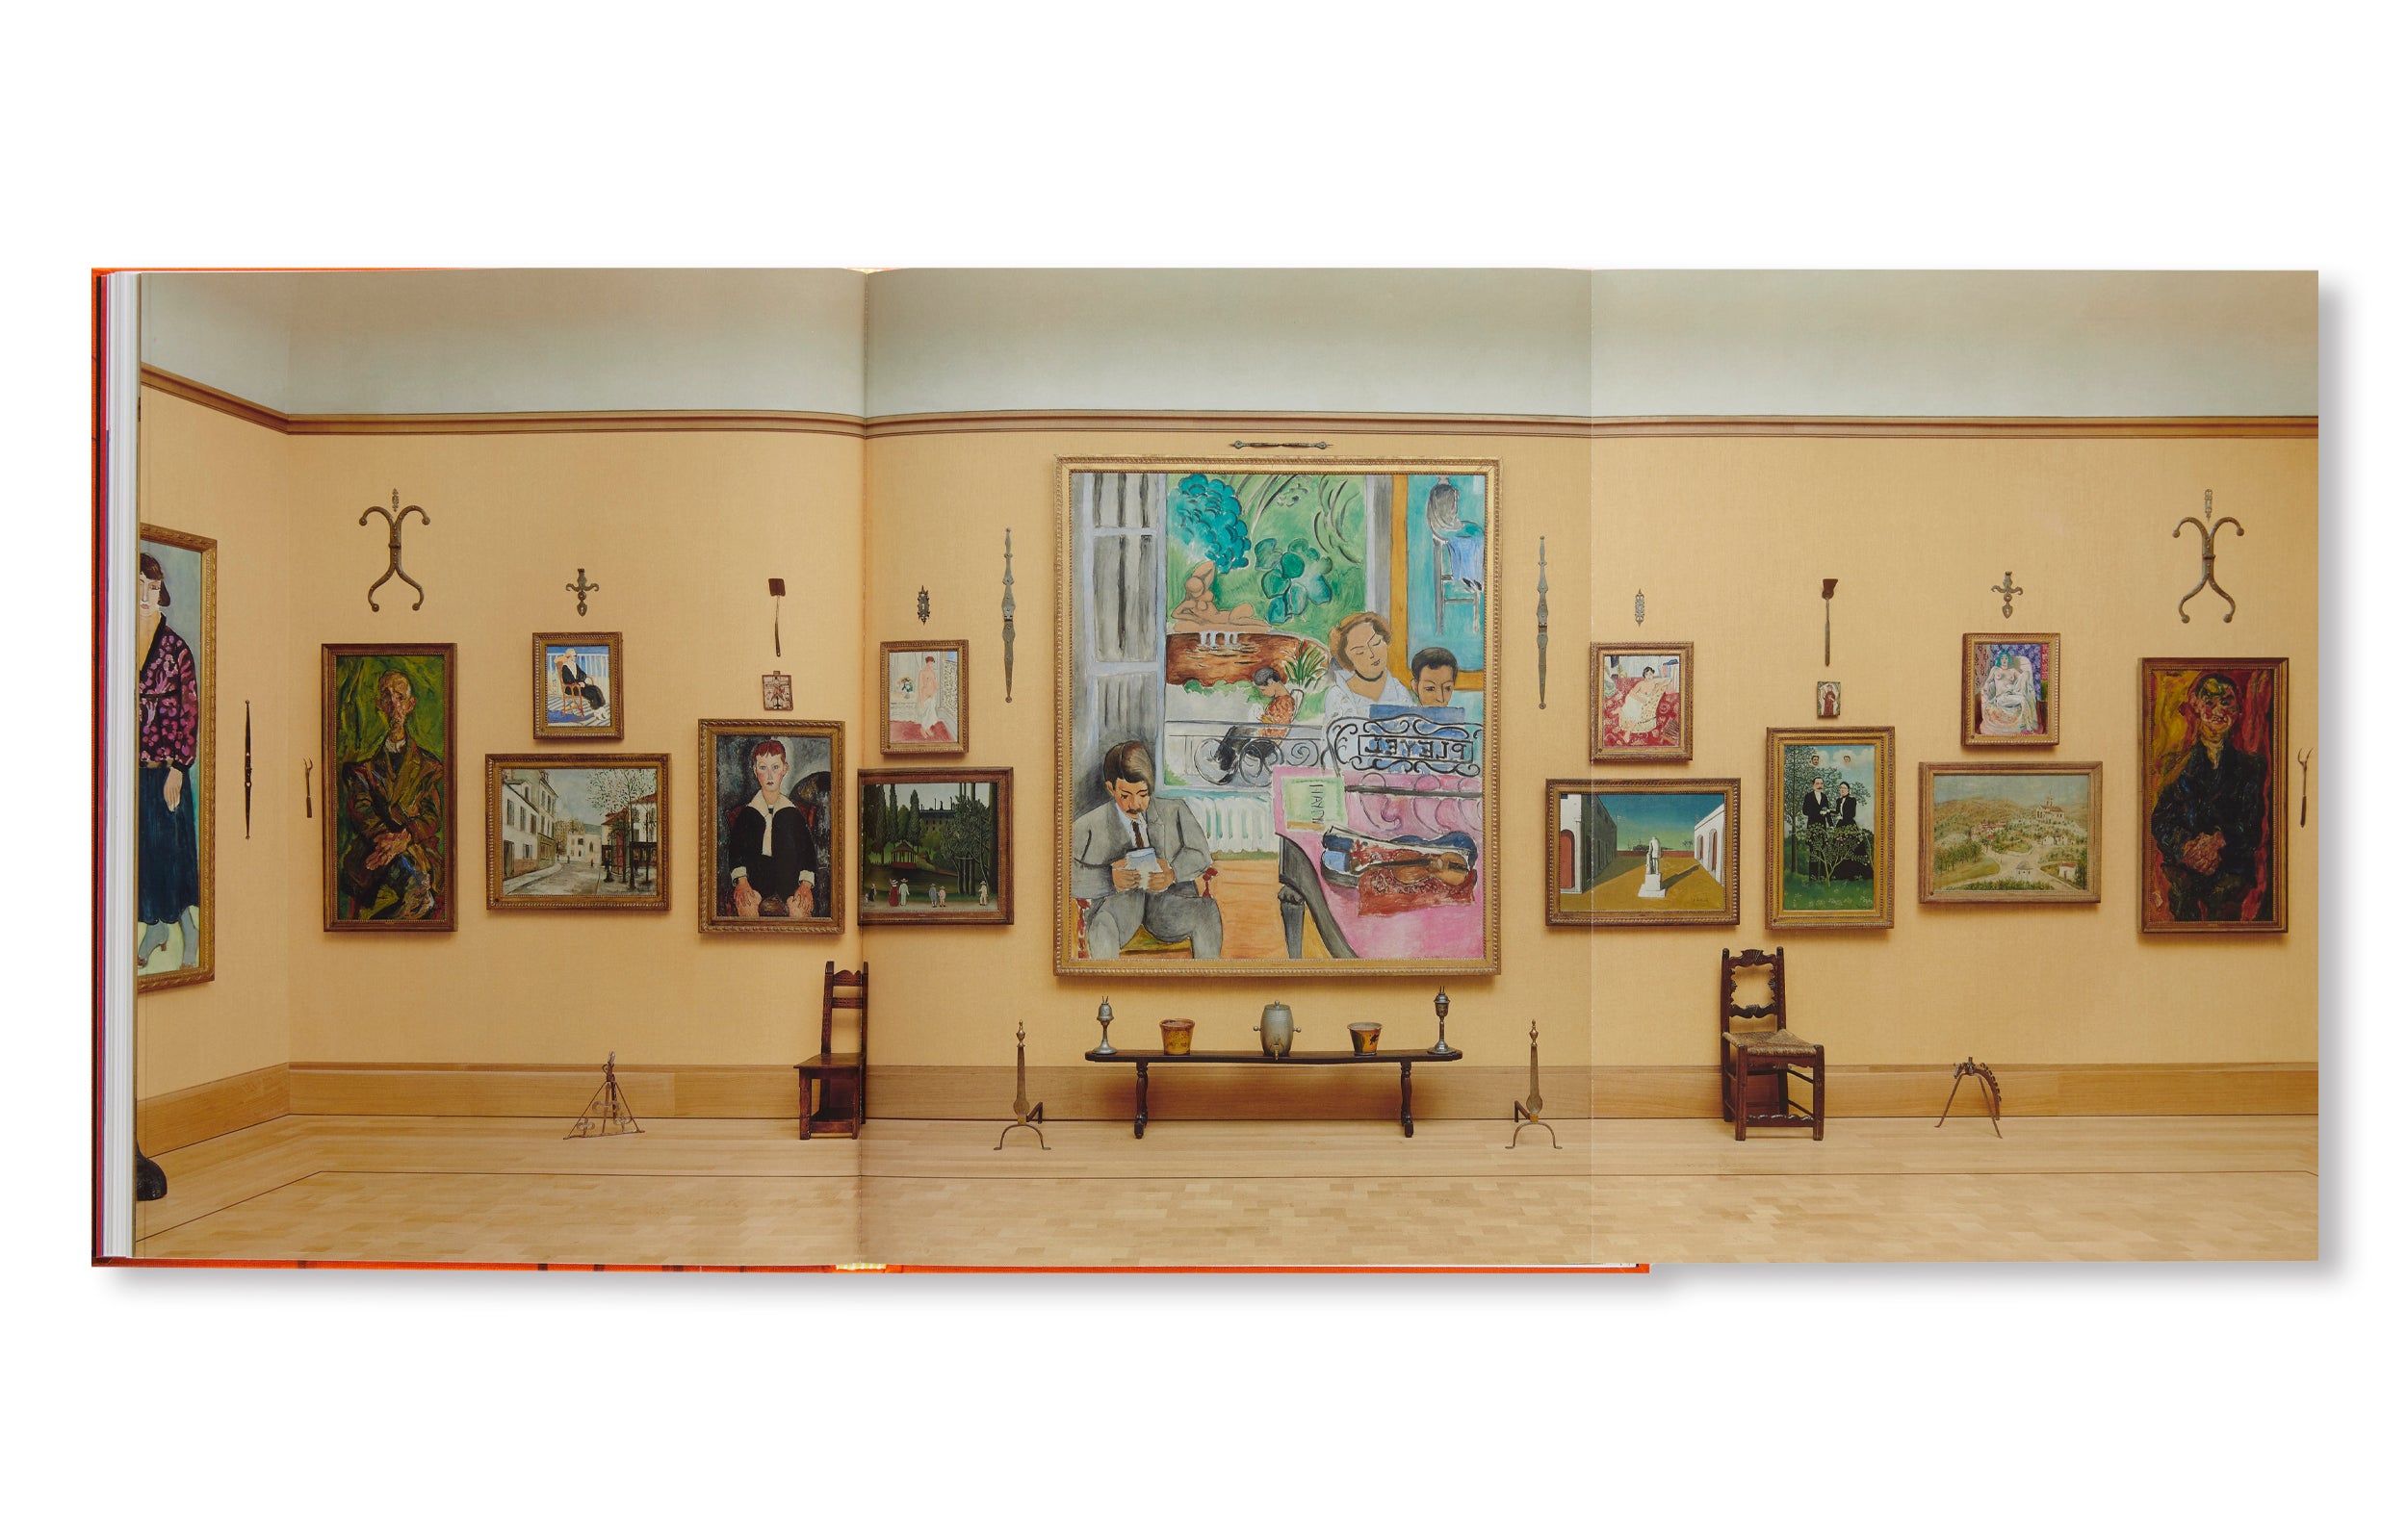 MATISSE IN THE BARNES FOUNDATION by Henri Matisse